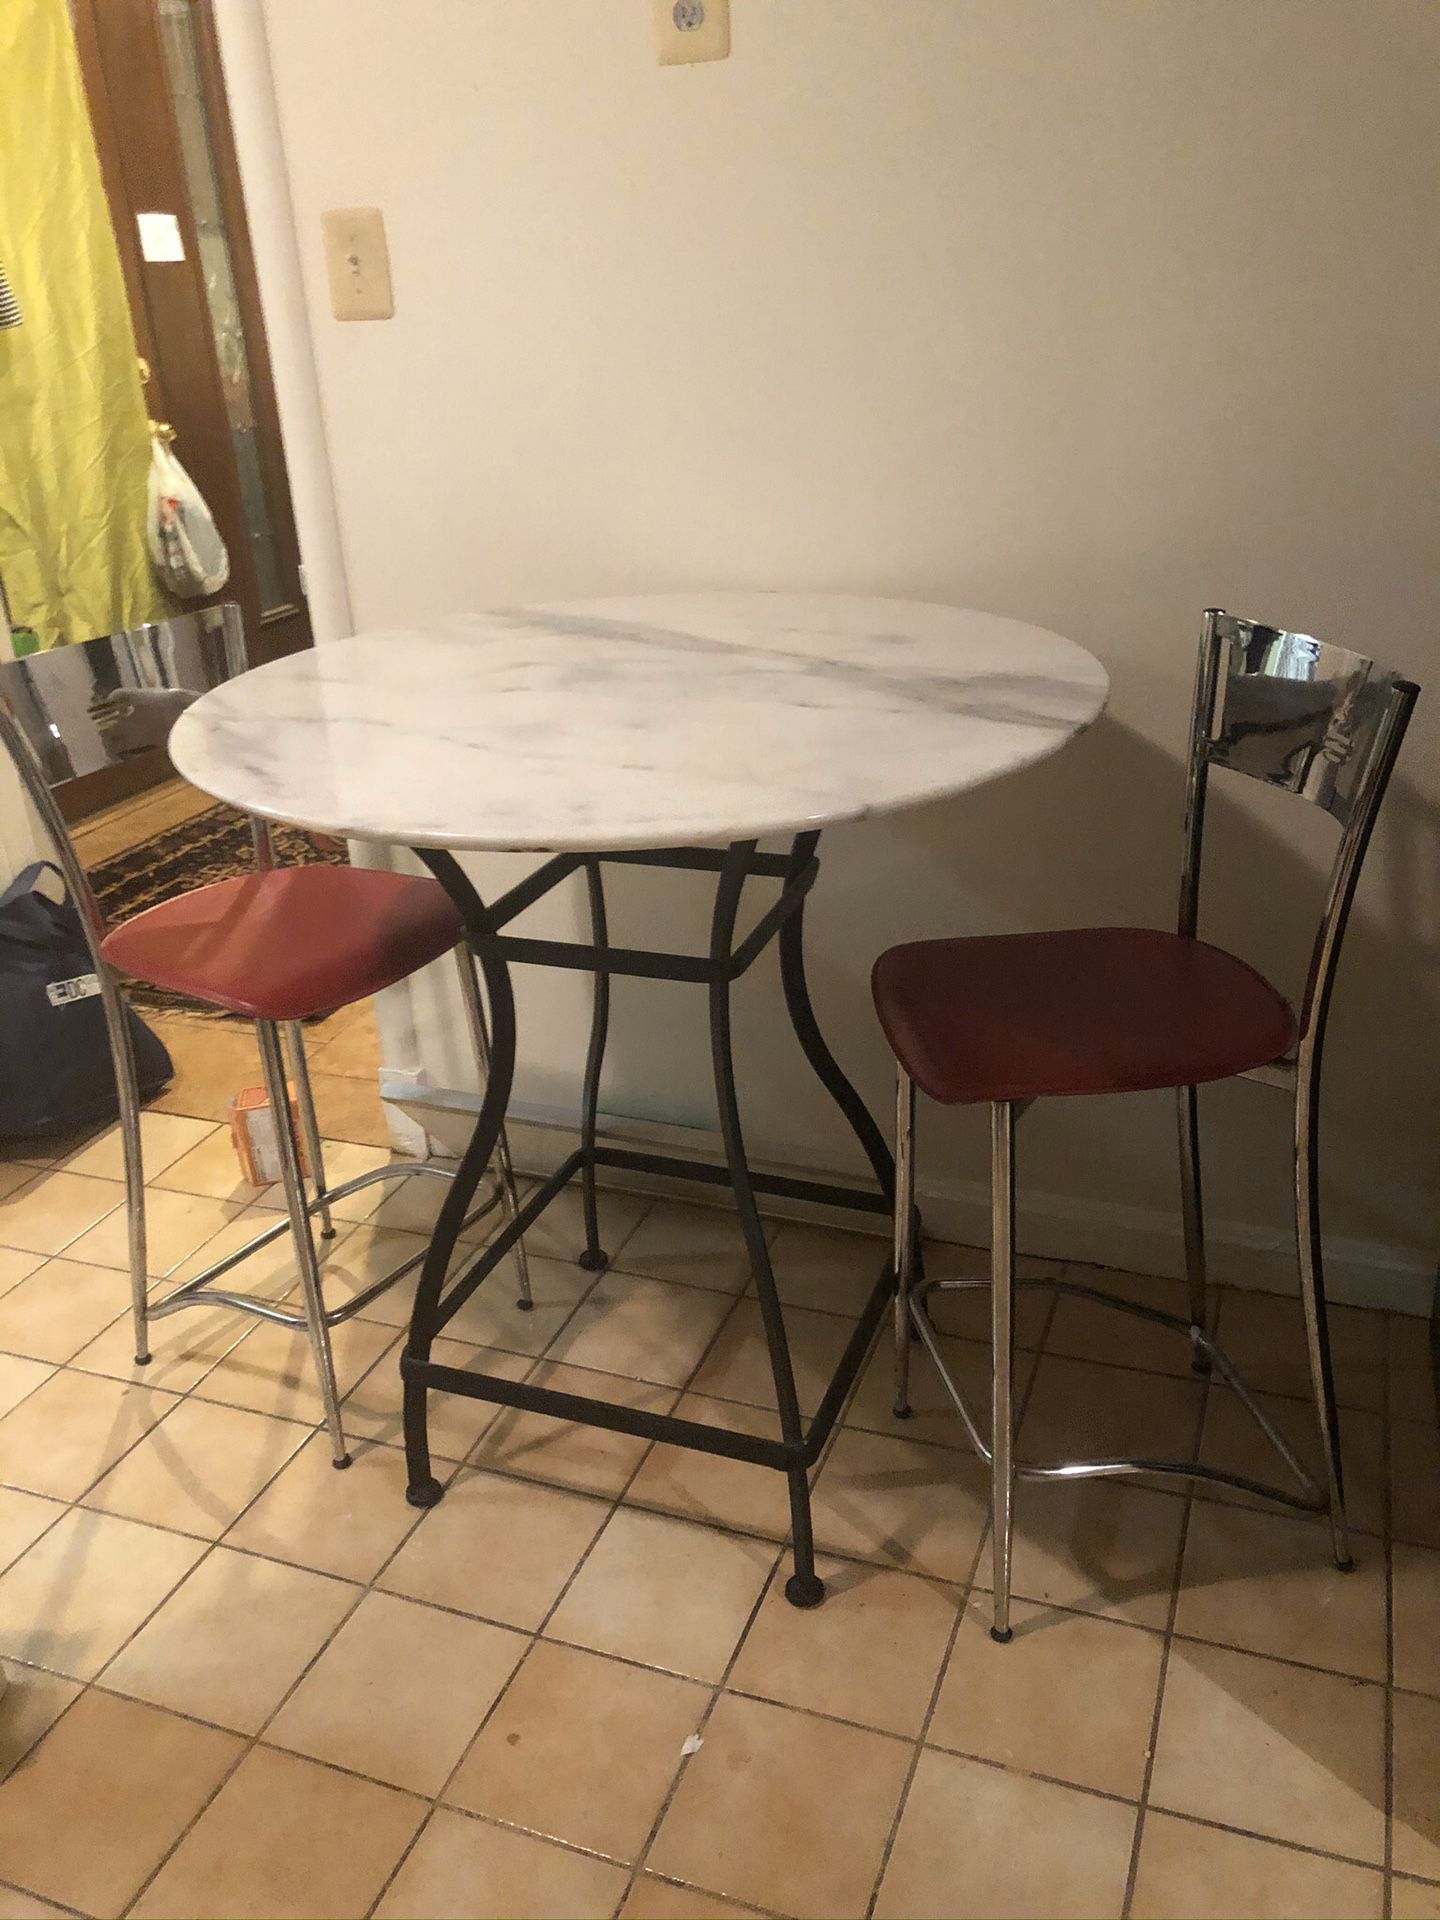 Kitchen nook table w/ solid stone tabletop and two chairs w/coffee cup designs